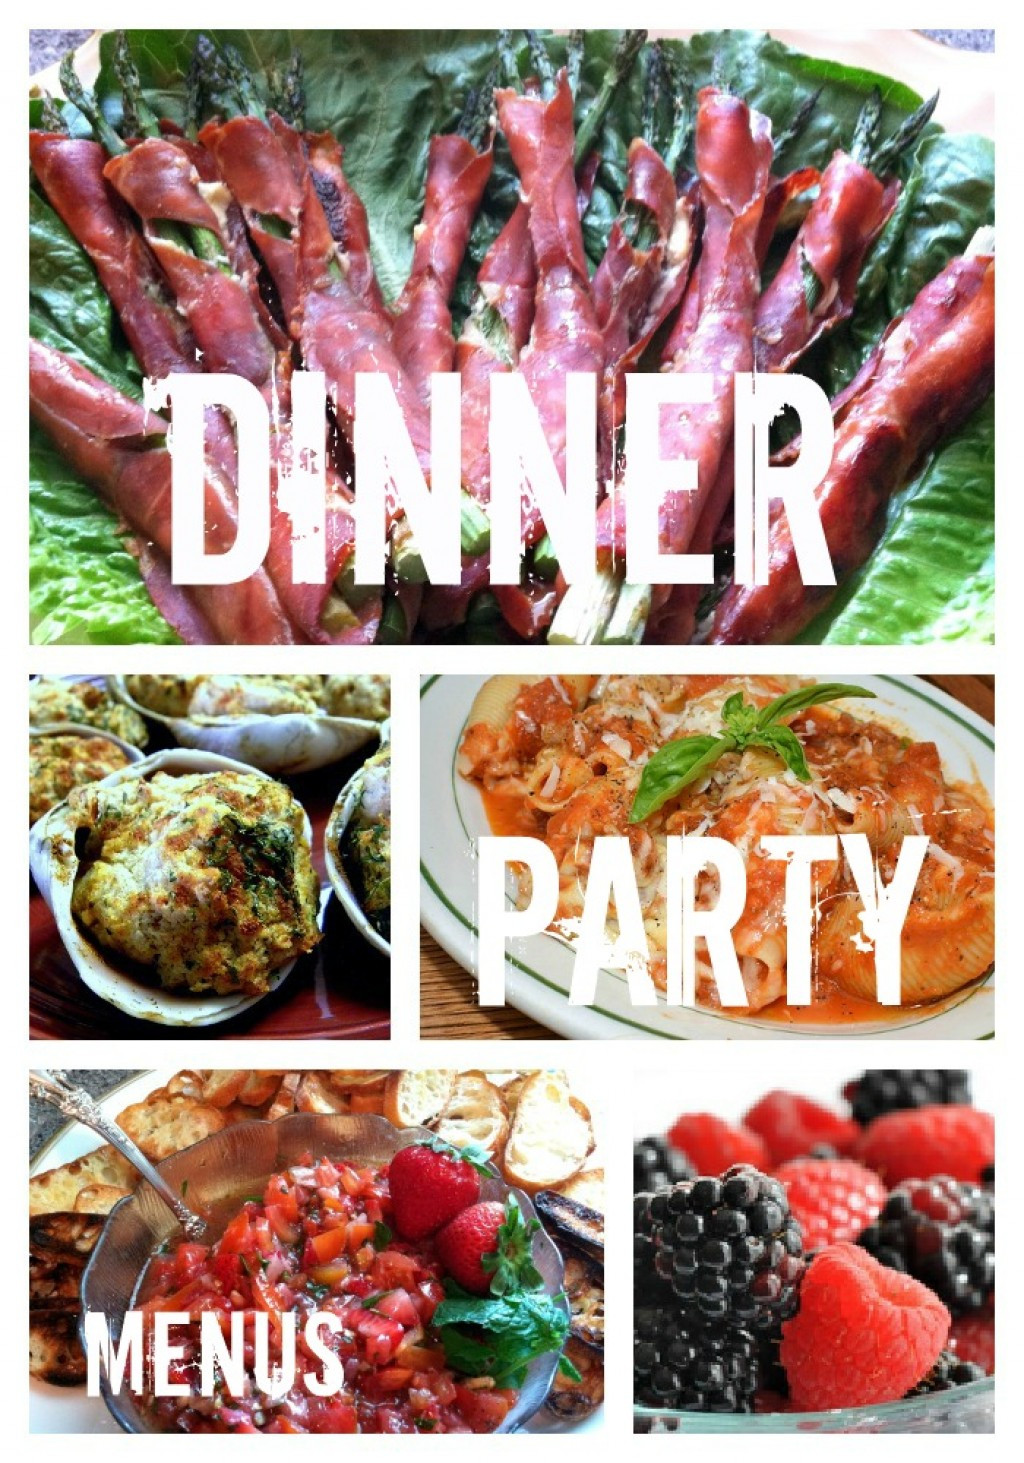 Menu Ideas For A Birthday Dinner Party
 Dinner Party Recipes